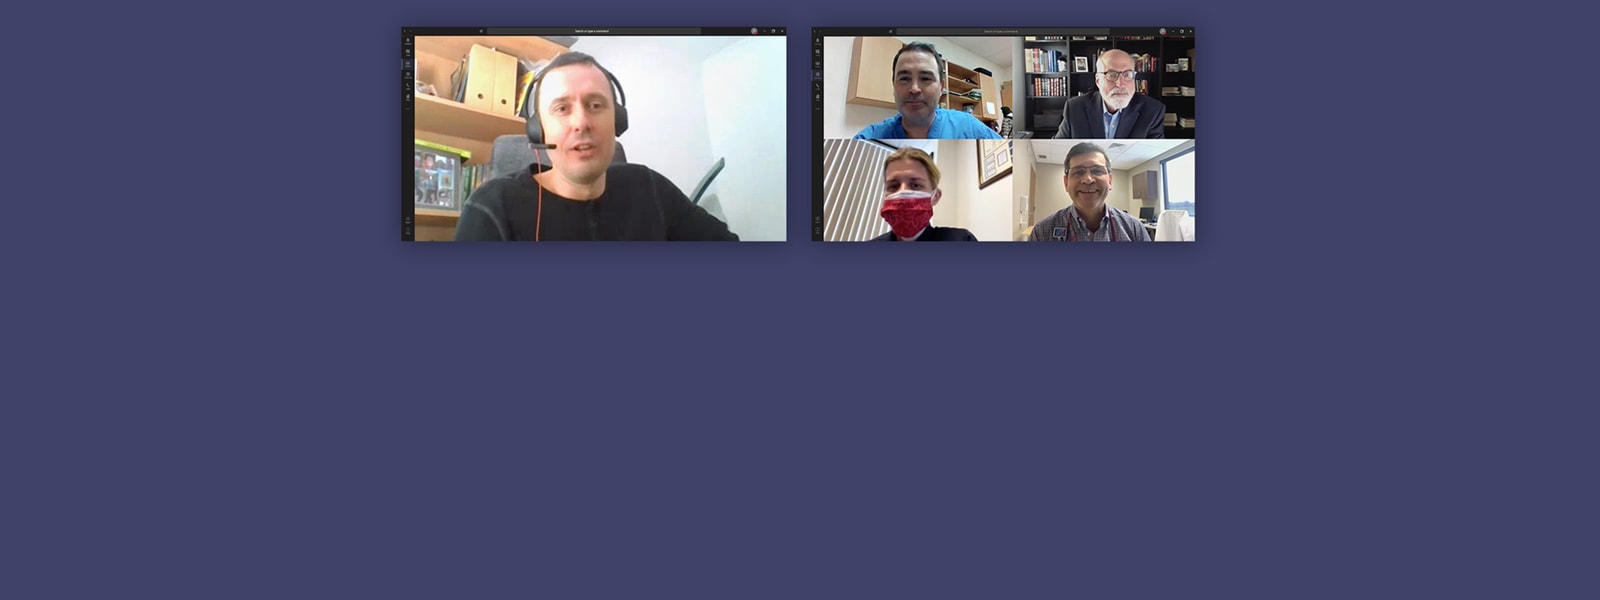 Five people work remotely using Microsoft Teams.